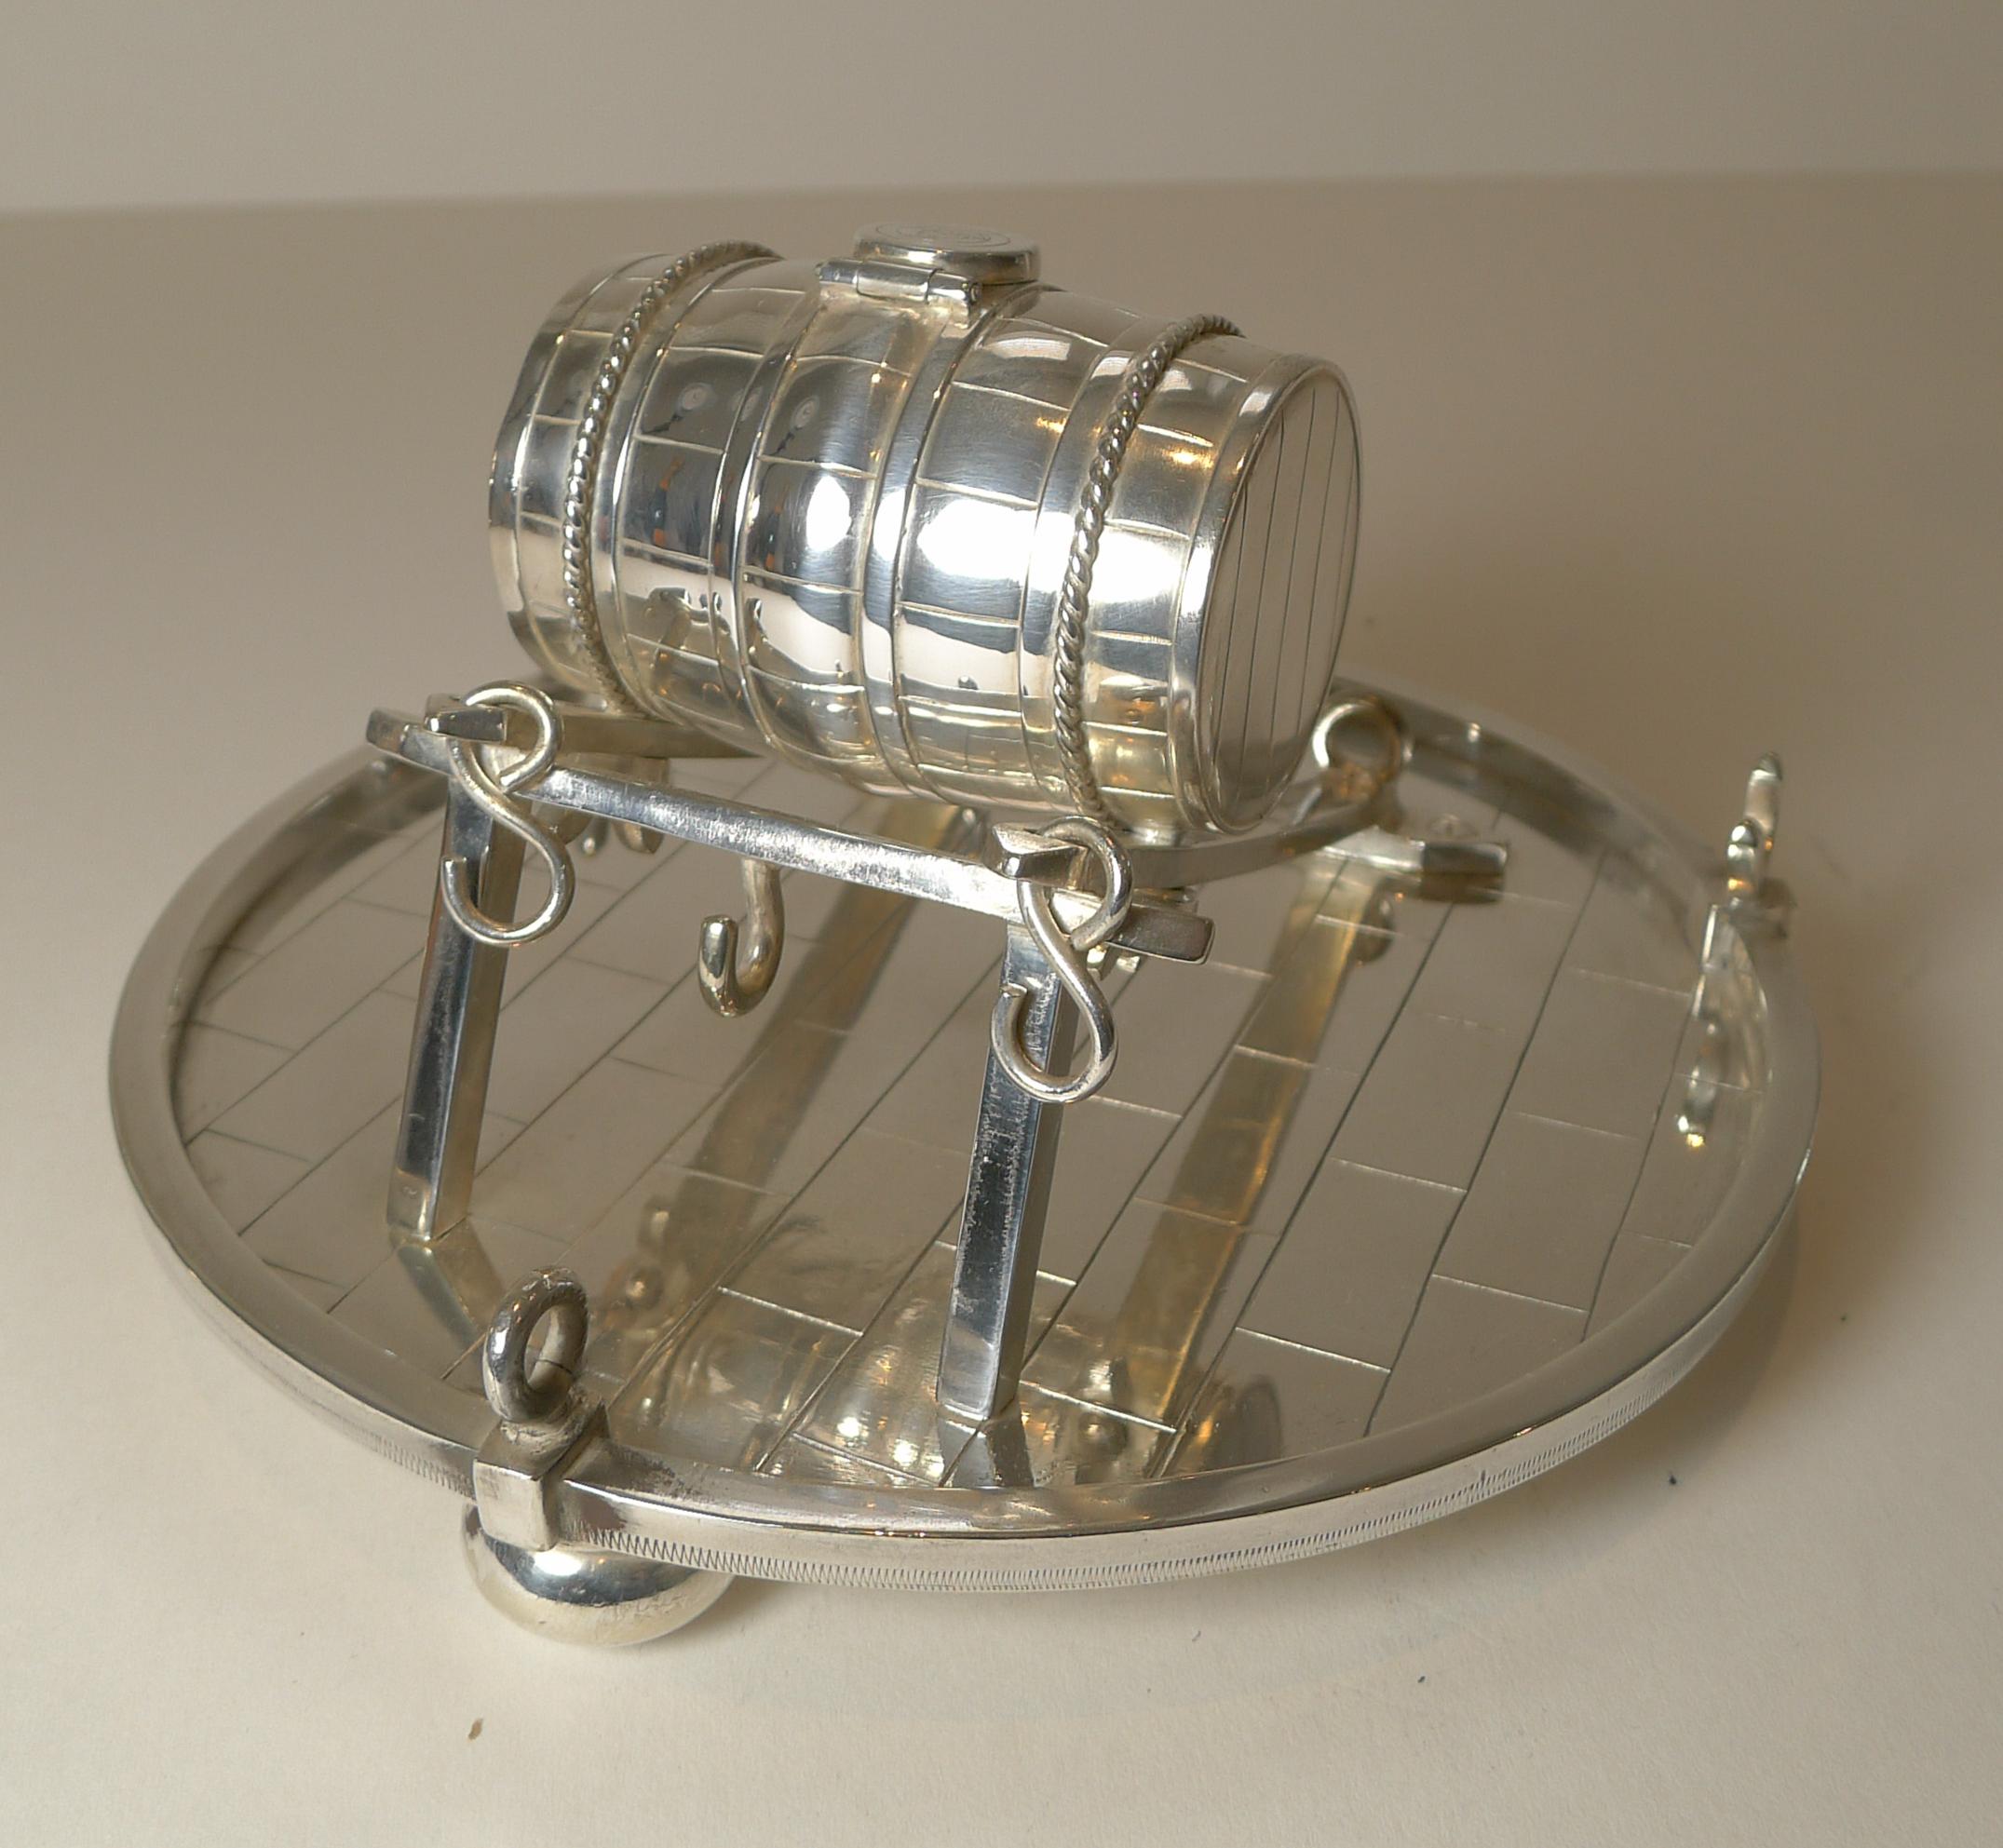 A rare Victorian silver plated novelty inkwell fashioned in the form of a barrel on stand, in turn standing on a brick paving; beautiful detail such as the hooks to the back of the stand and incorporating a pen rest to the front, I am including the